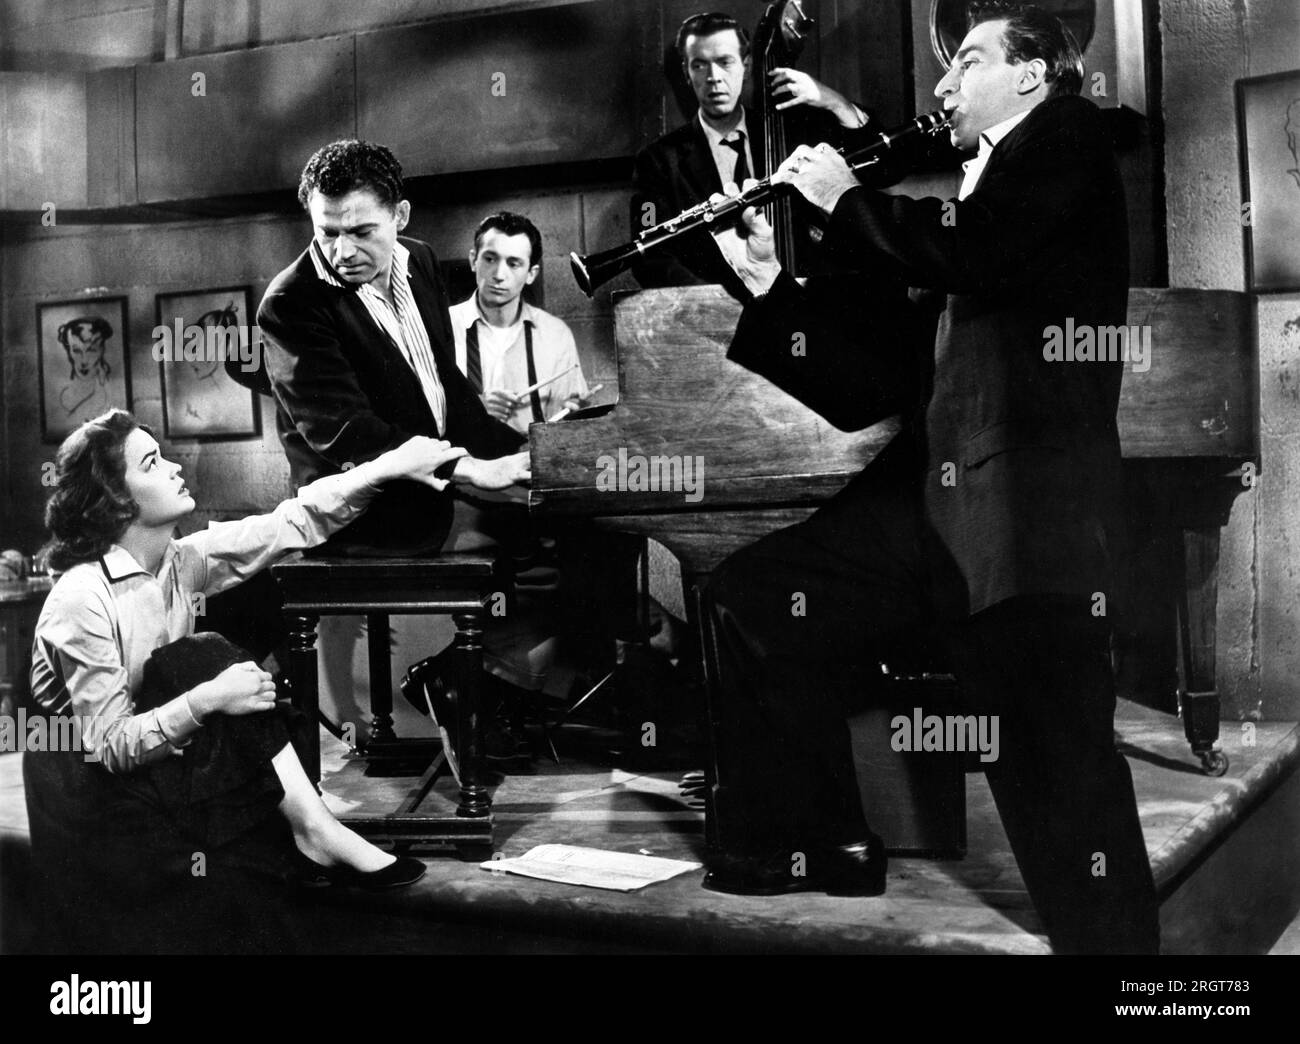 Kathryn Grant (Crosby), Nehemiah Persoff (at piano), Buddy DeFranco (with clarinet), on-set of the Film, 'The Wild Party', United Artists, 1956 Stock Photo